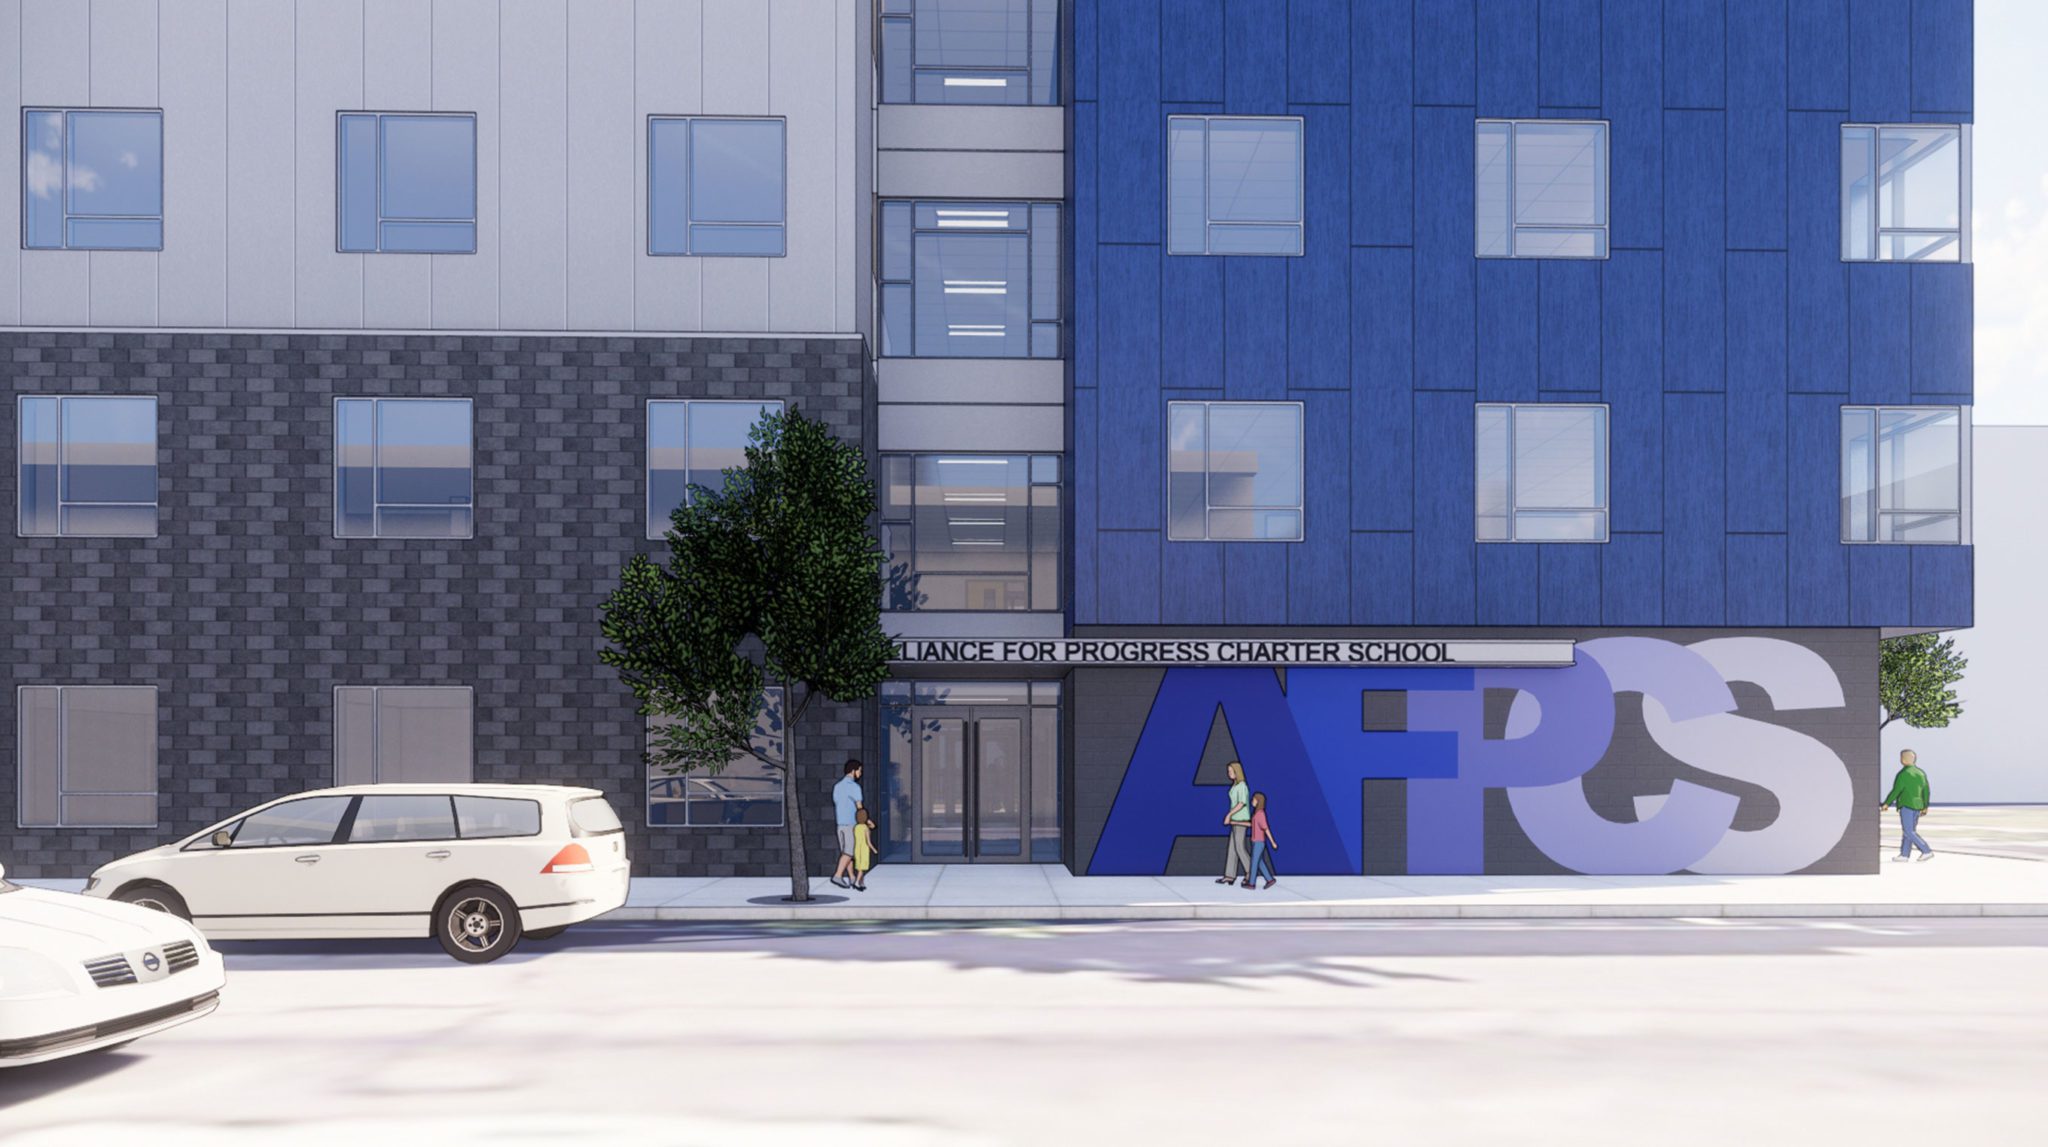 Alliance for Progress Charter School NORR Architecture, Engineering